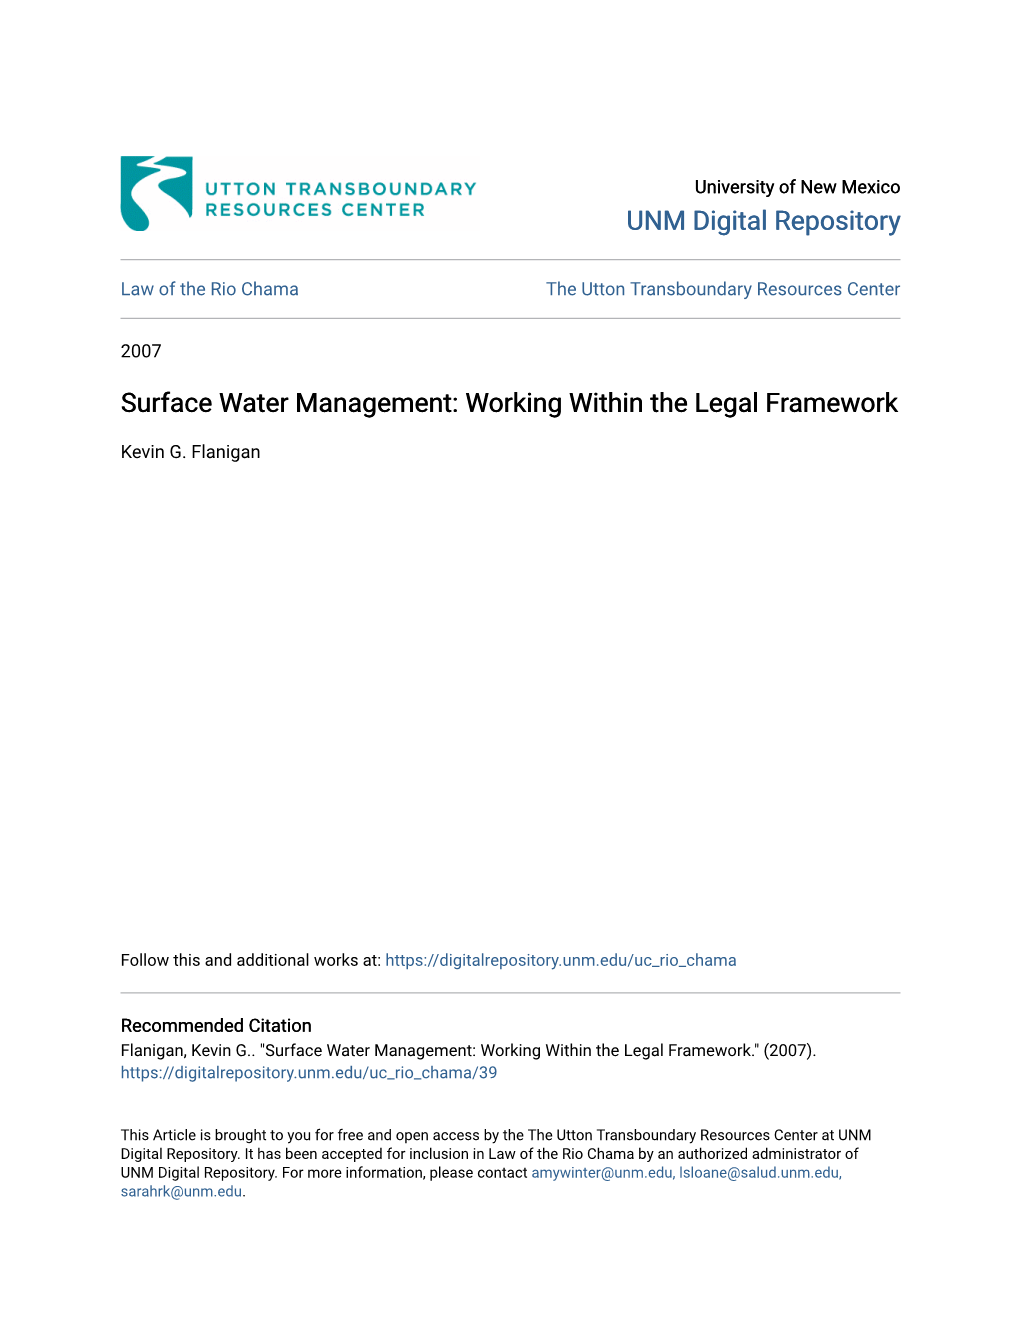 Surface Water Management: Working Within the Legal Framework